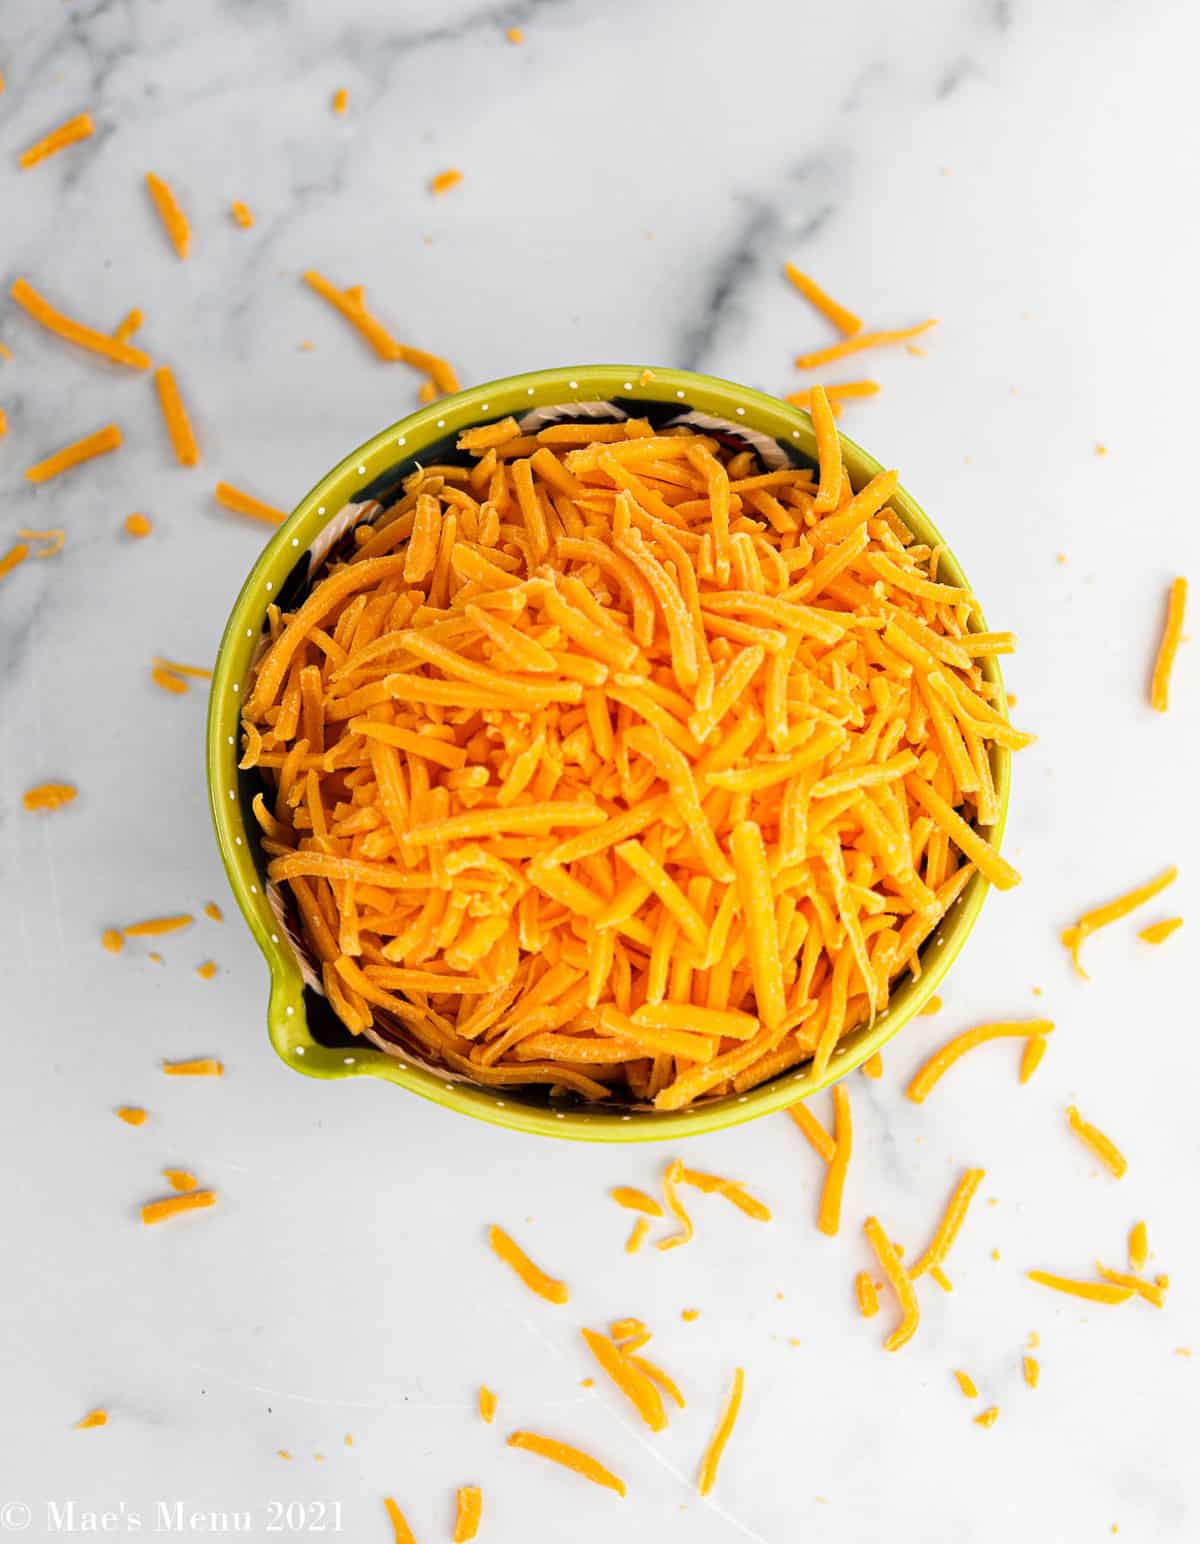 An overhead shot of a small dish of shredded cheddar cheese